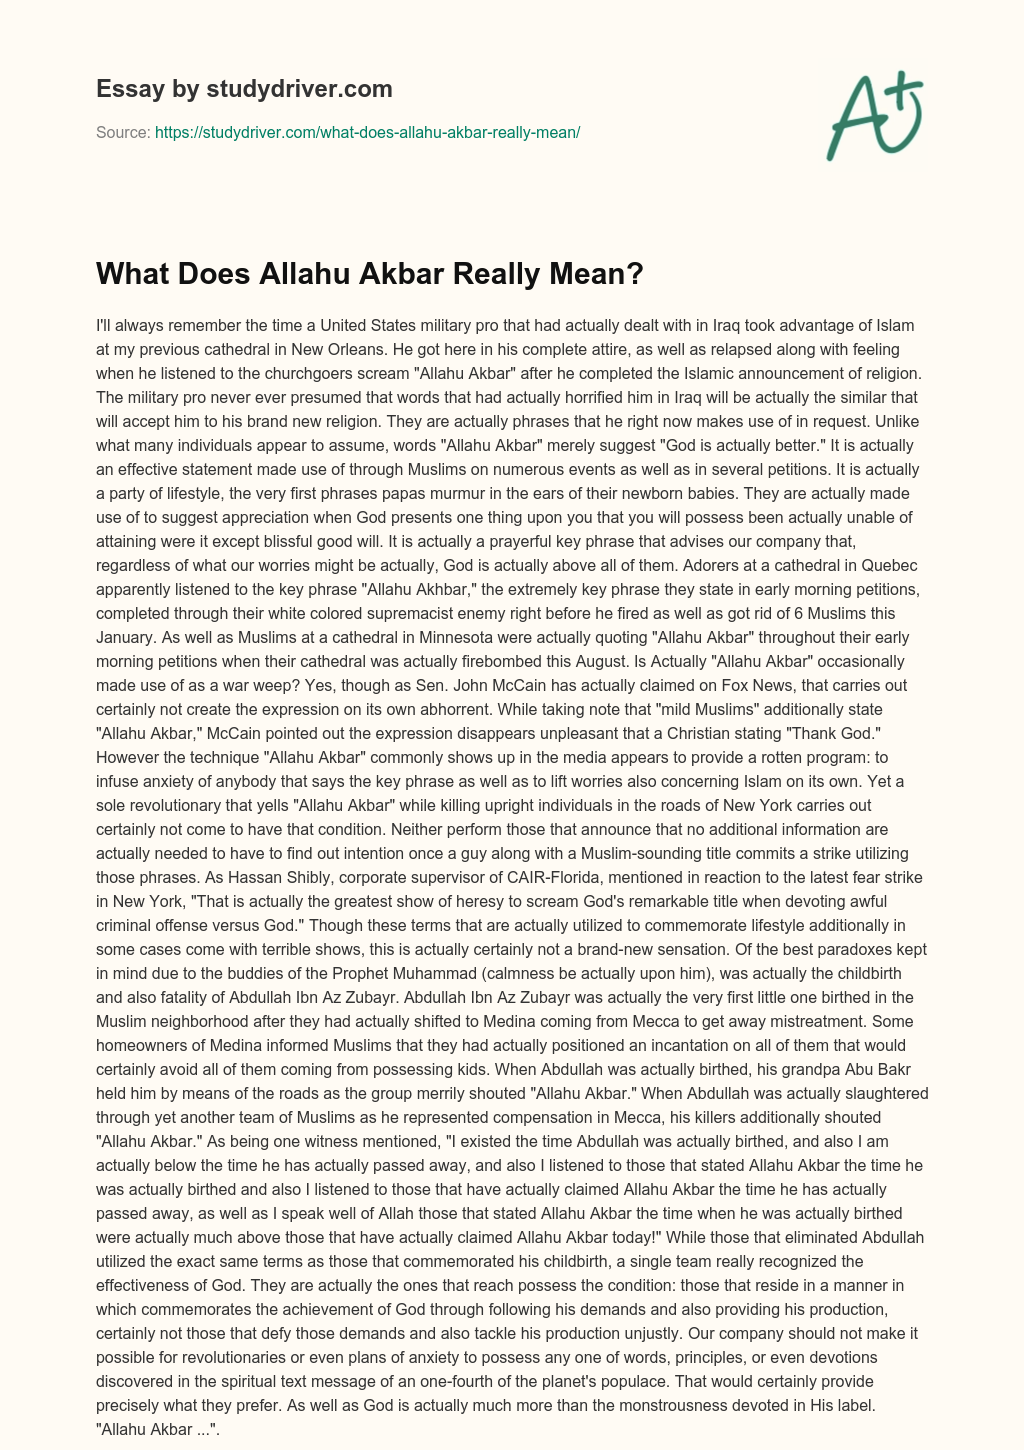 What does Allahu Akbar Really Mean? essay